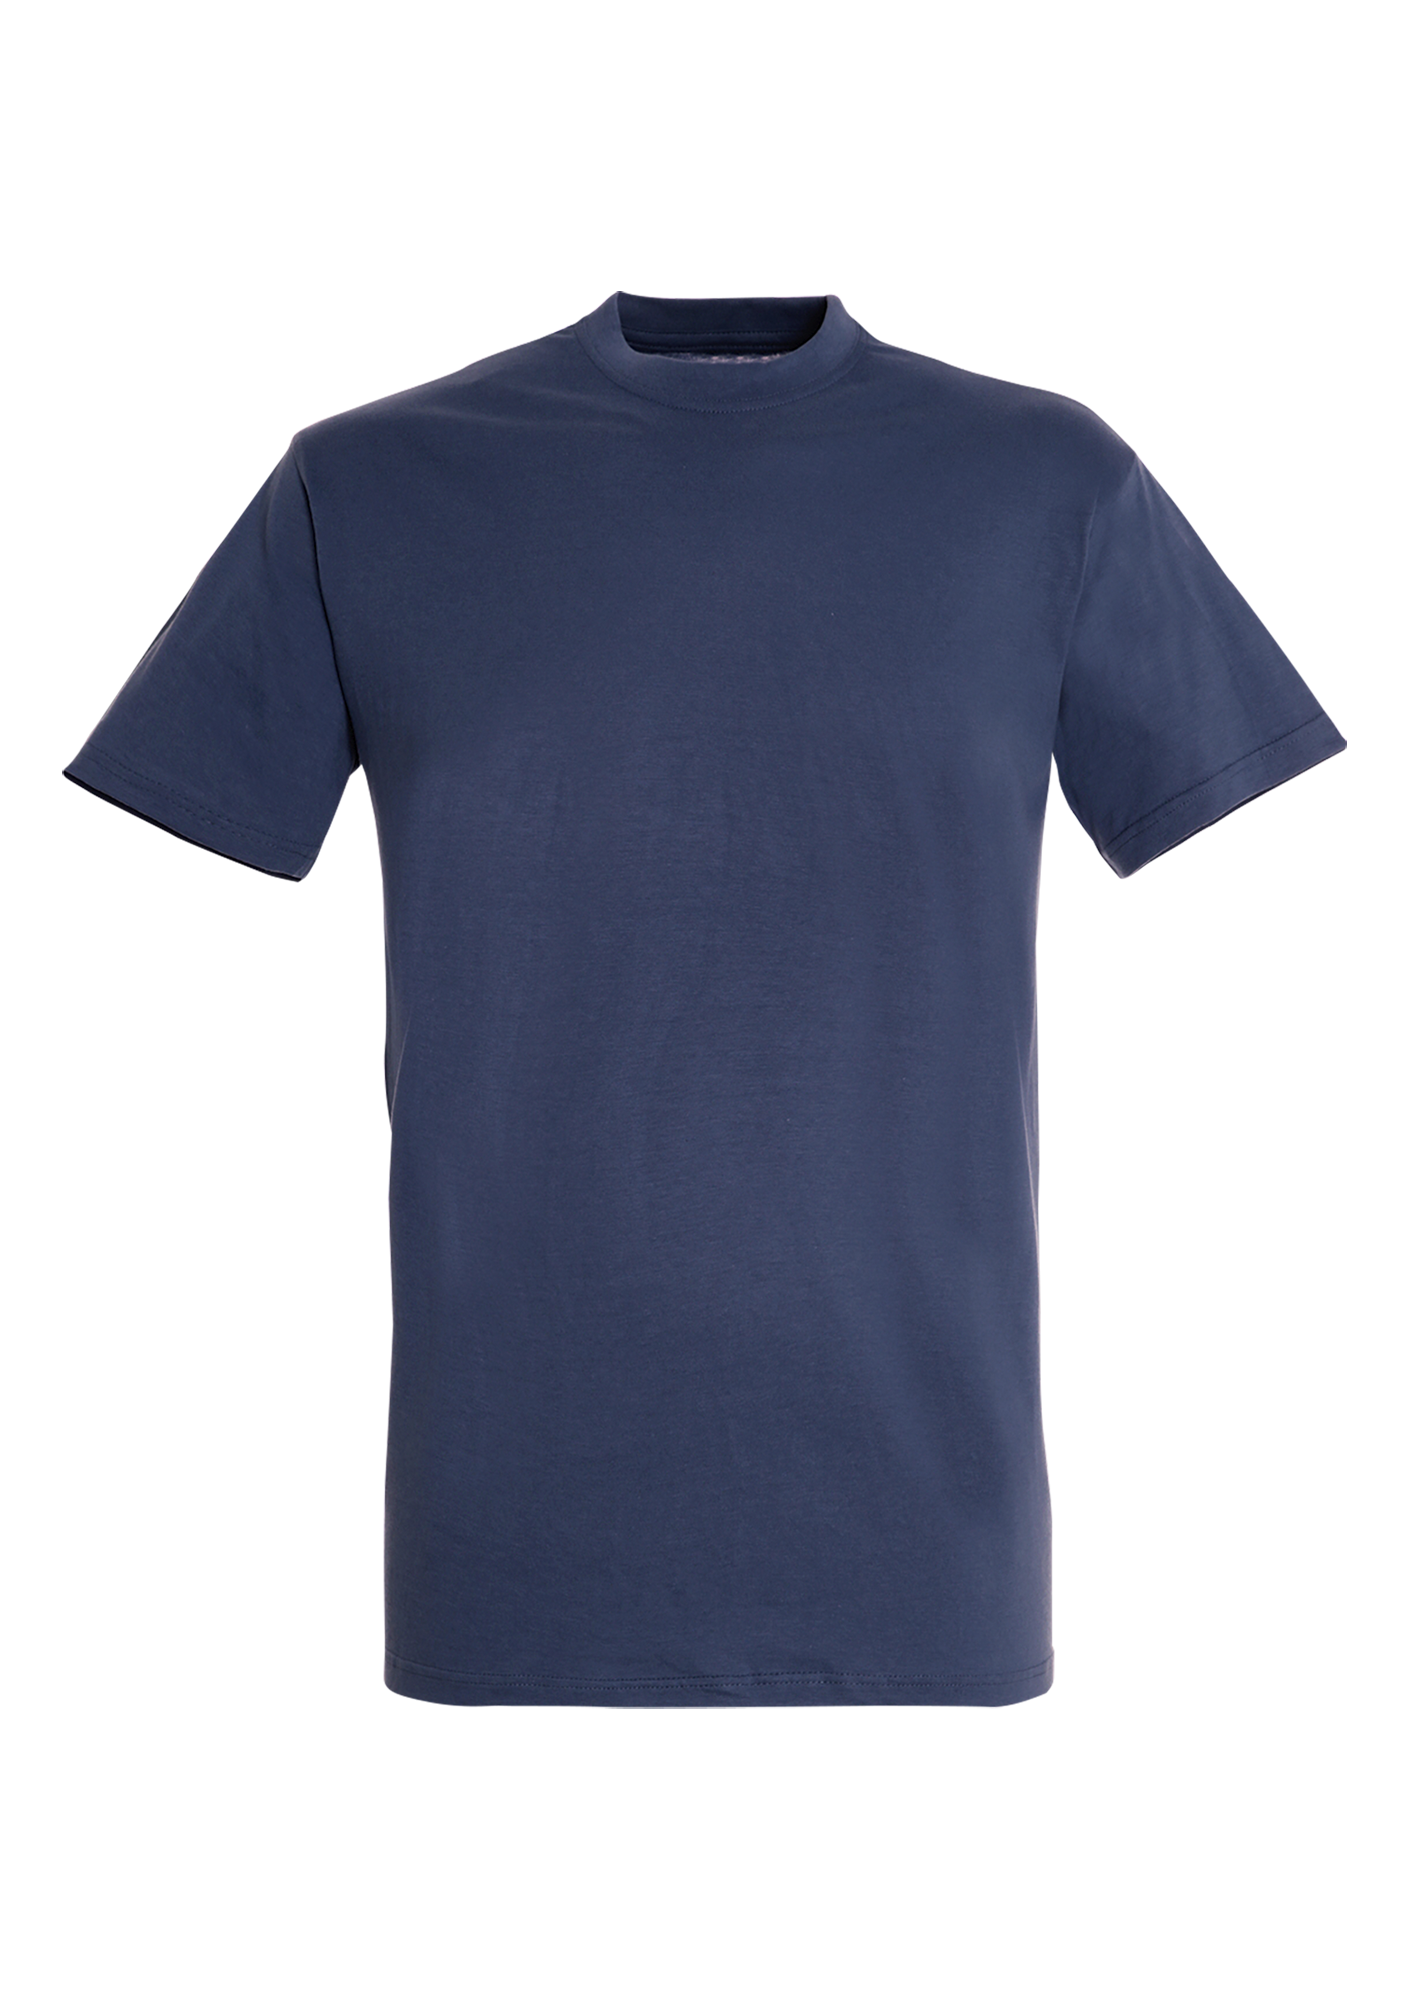 T-shirt Adulte collection "30 Ans" Navy - REGENT-ADULTE-FACE-FRENCHMARINE